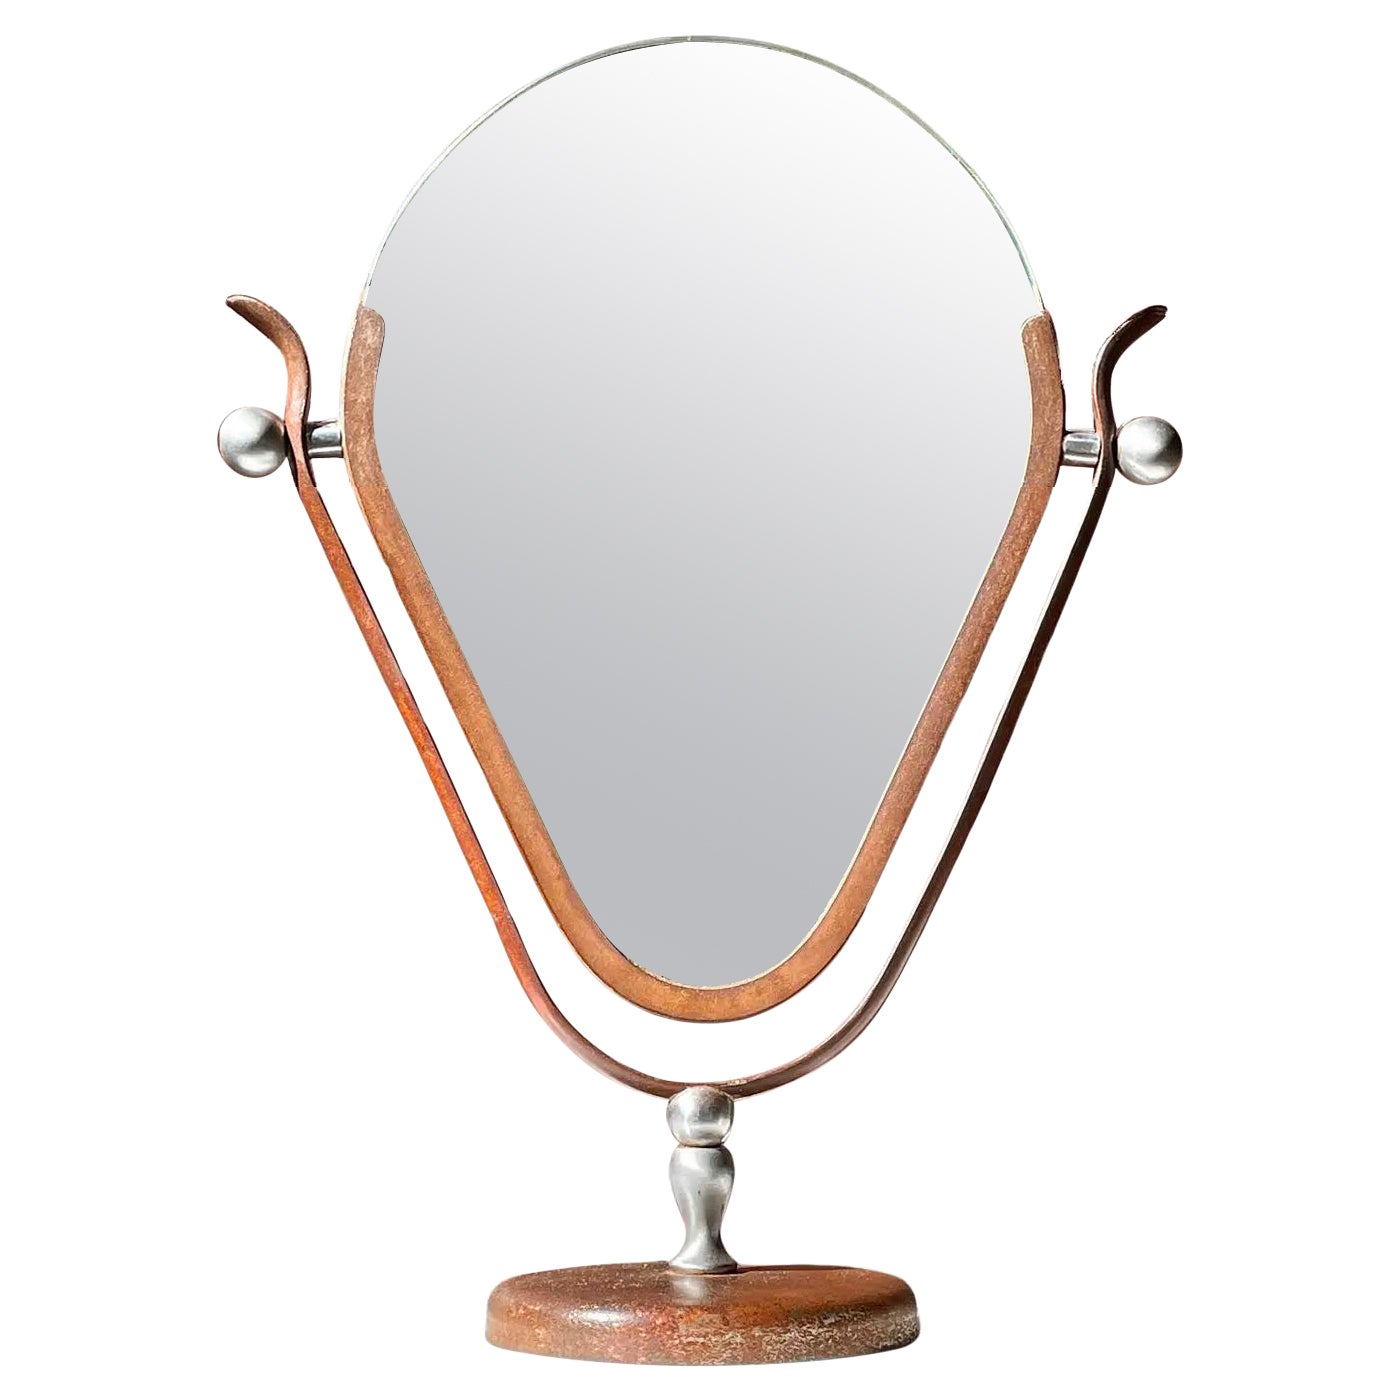 Heavily Patinated Swivel Mirror Double Sided Vanity Department Store Countertop For Sale